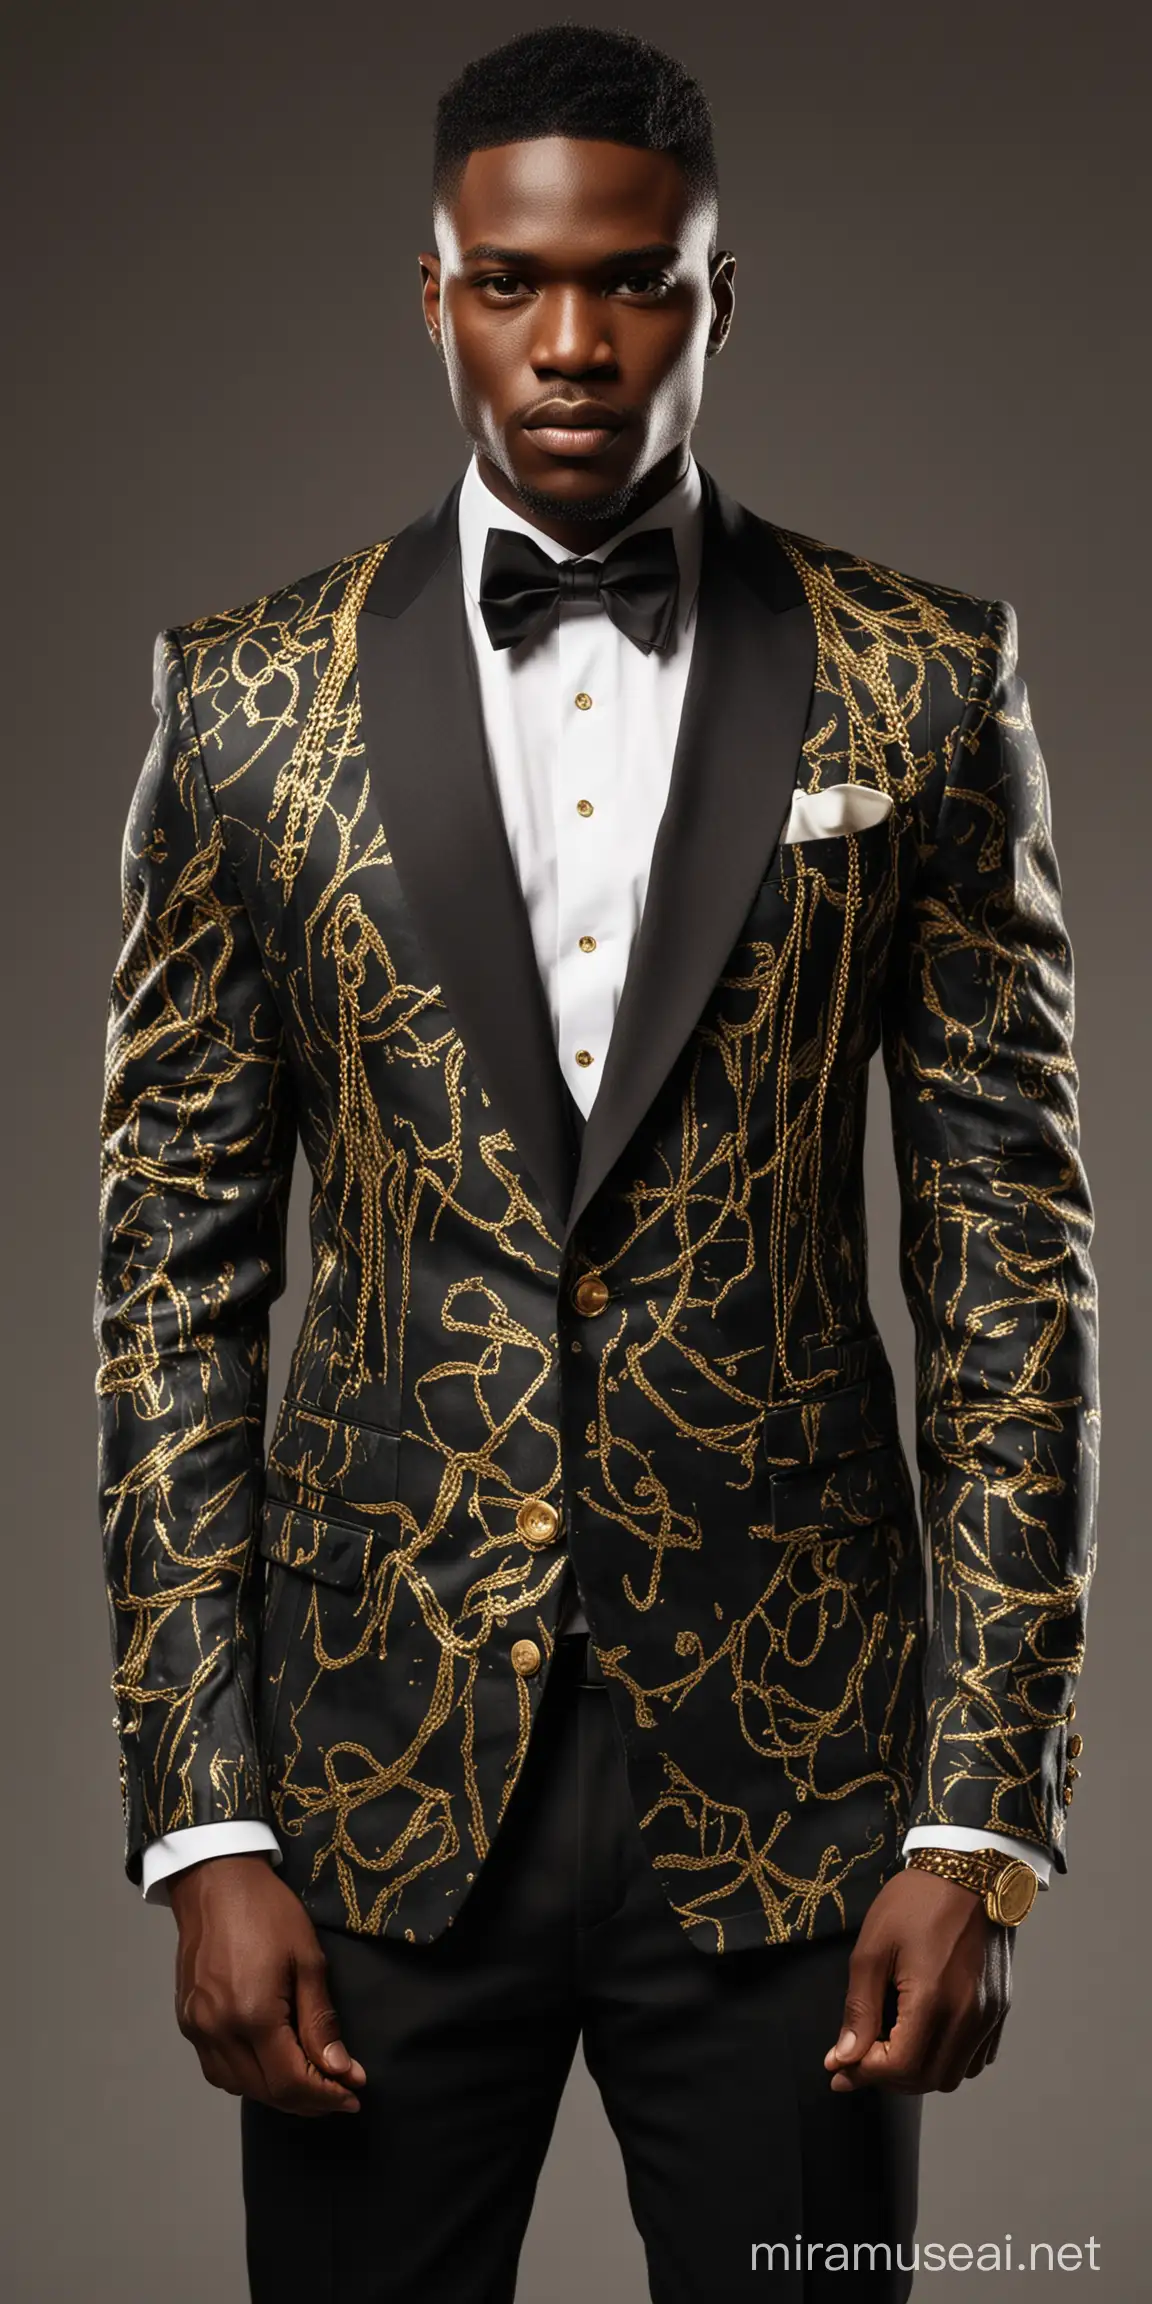 An African male model wearing a tuxedo made with camouflage design. There are gold chains and gold buttons designed on the tuxedo. The model walks Gracefully on a runway. Cinematic lighting, hyperealistic photo shoot